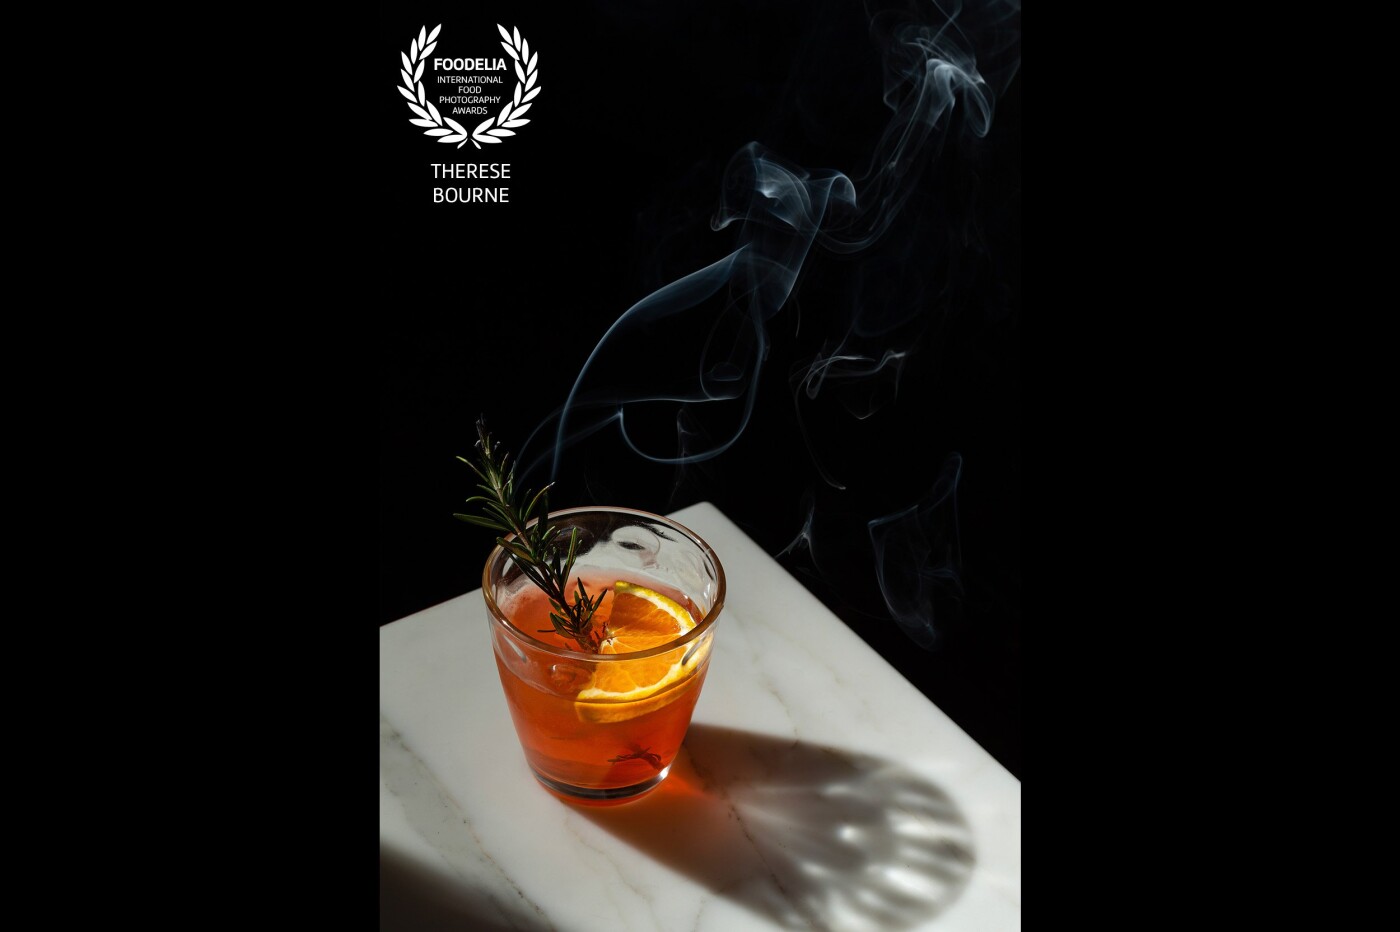 I shot this cocktail for a photography challenge. My aim was to capture the night time vibes and the drama of the shadow and the smoking rosemary garnish.